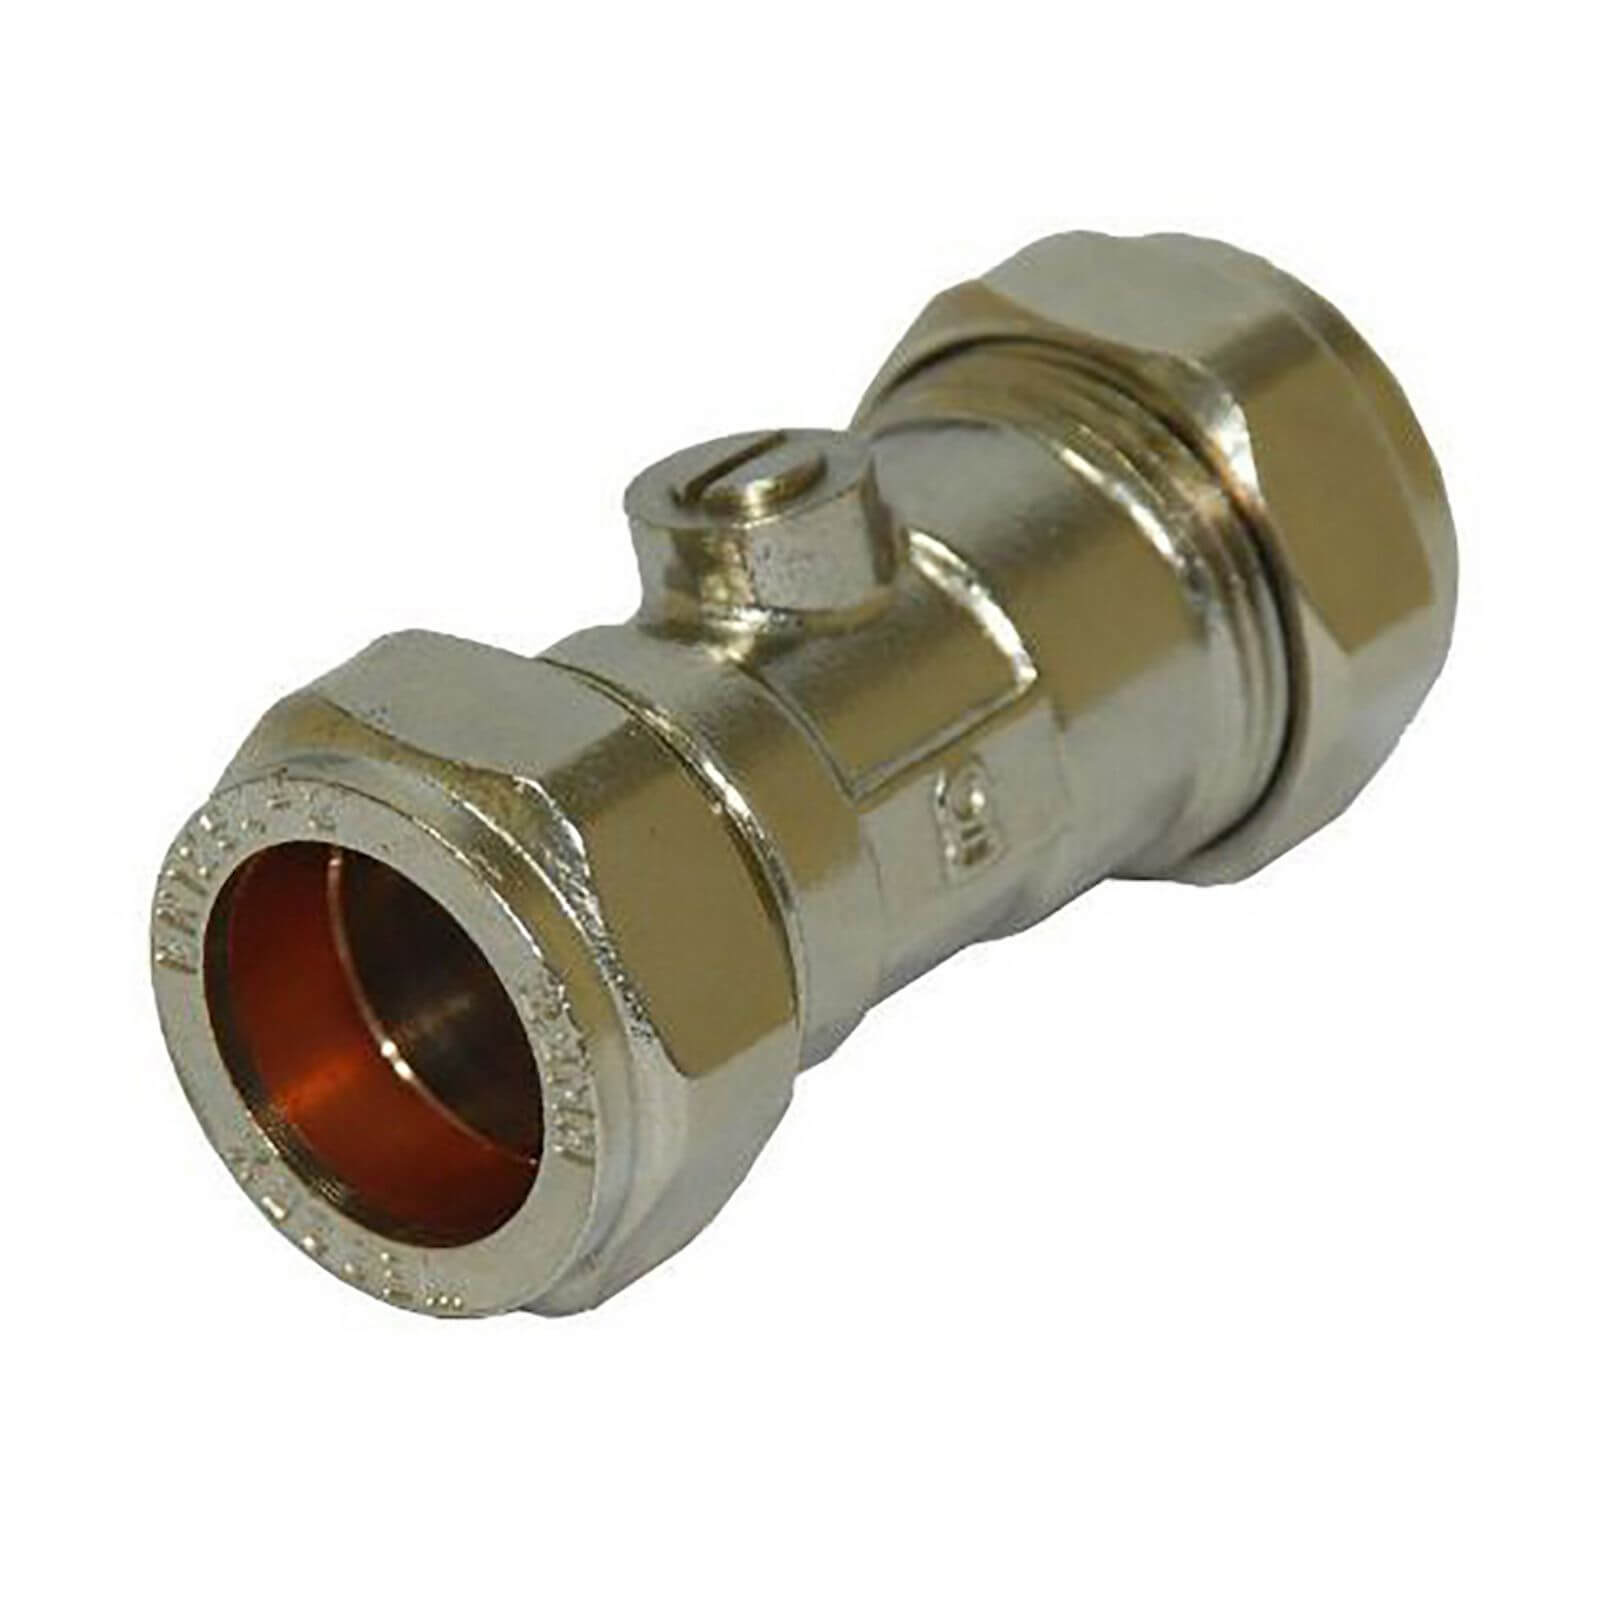 Compression Fitting Isolation Valve - 22mm